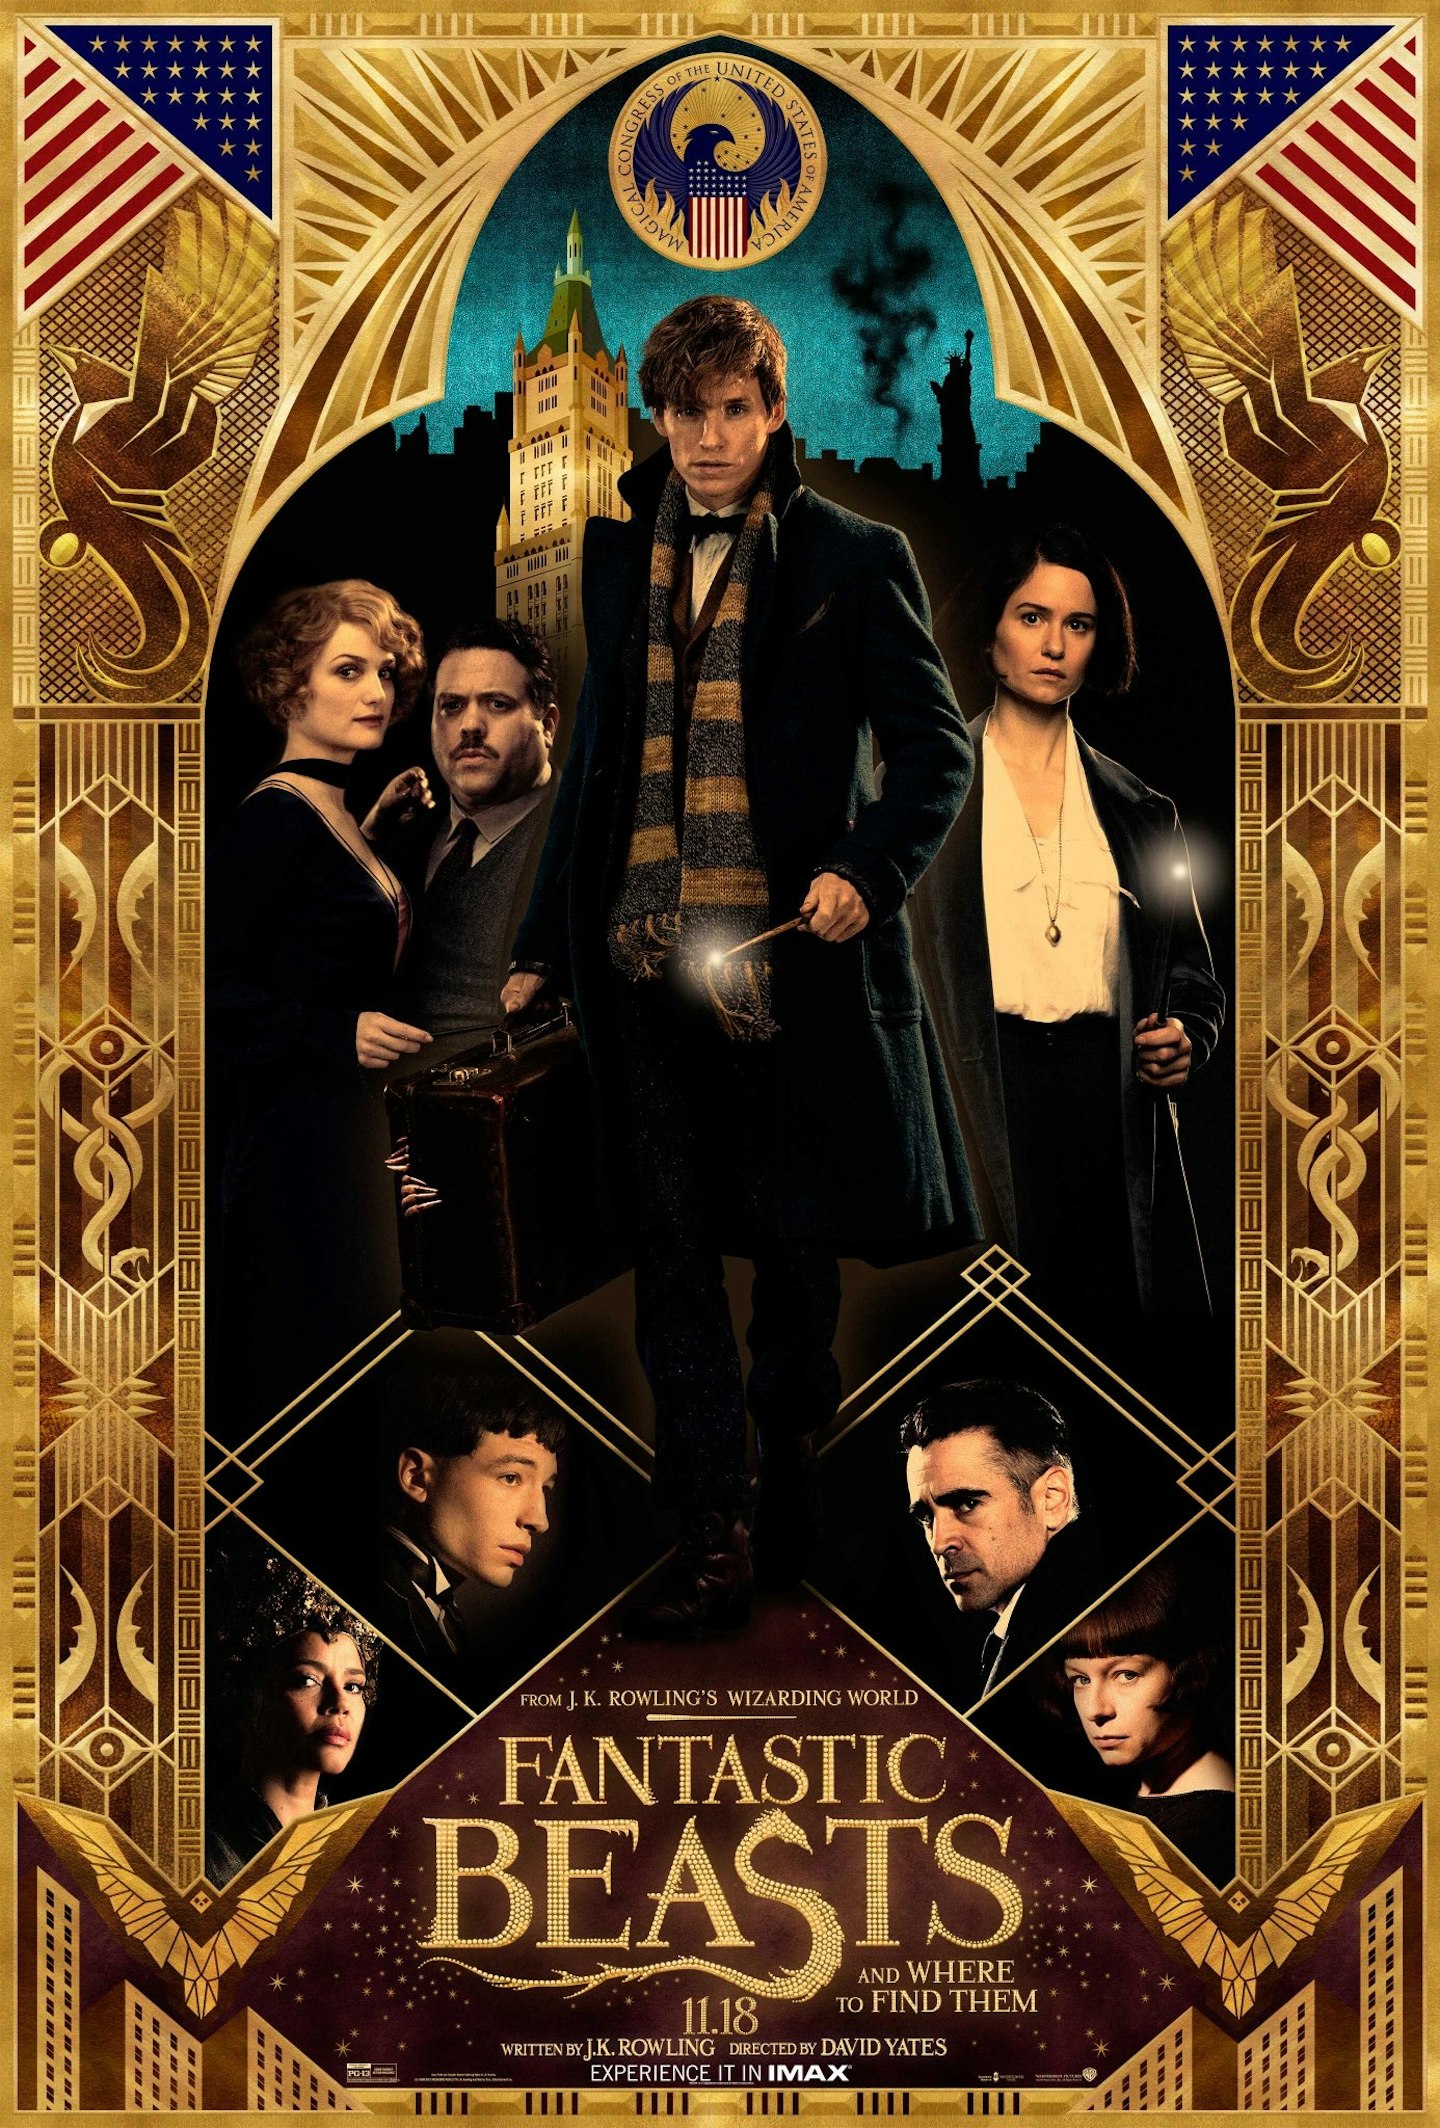 Fantastic Beasts And Where To Find Them IMAX poster